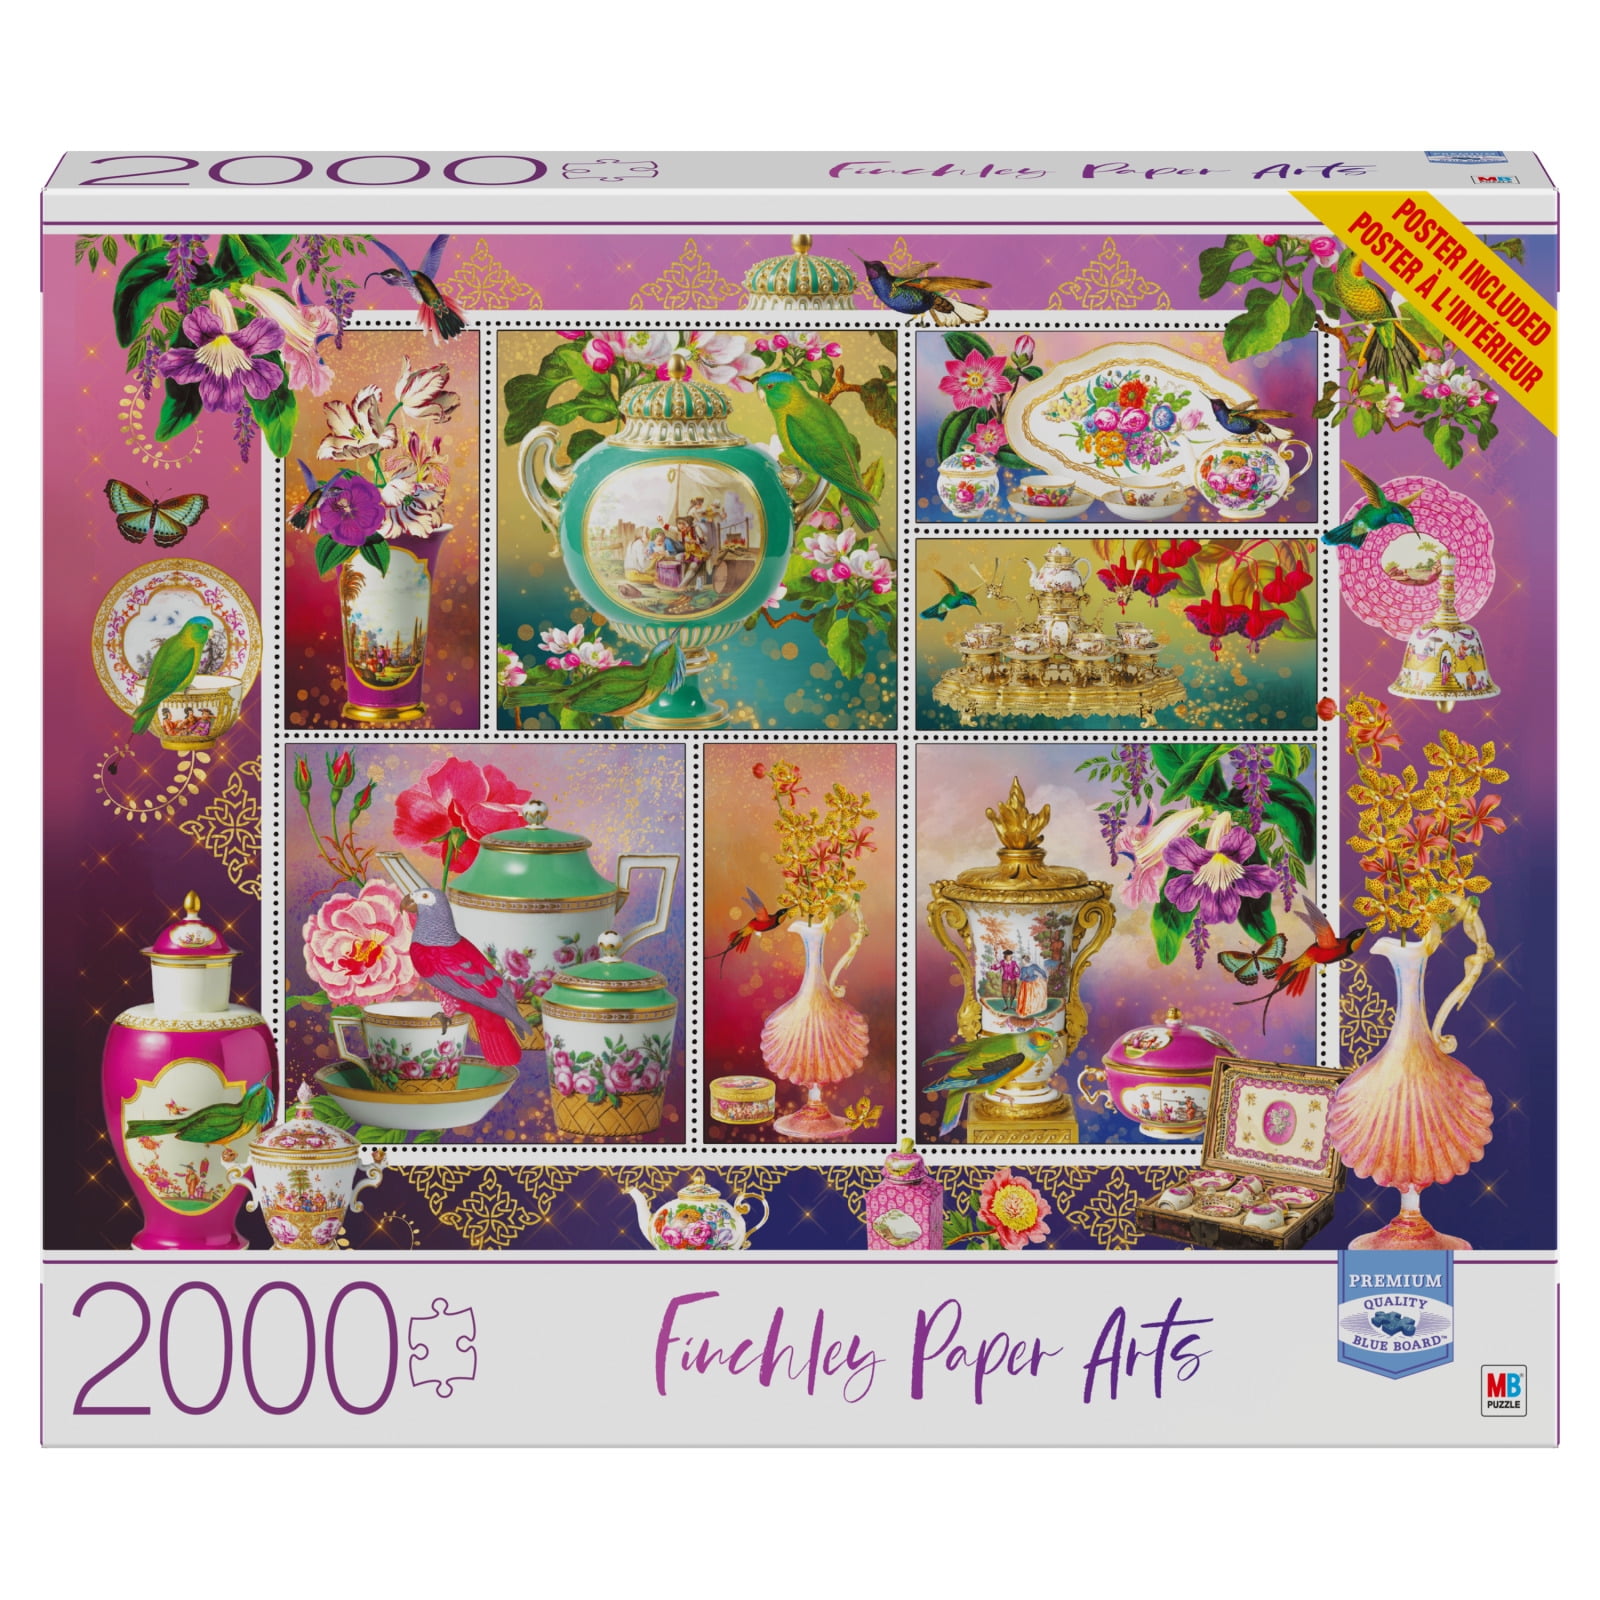 2000 Piece Jigsaw Puzzle Rose Puzzles 2000 Piece Puzzles for Adults Puzzles Modern Home Decor Wall Art Unique Gift 